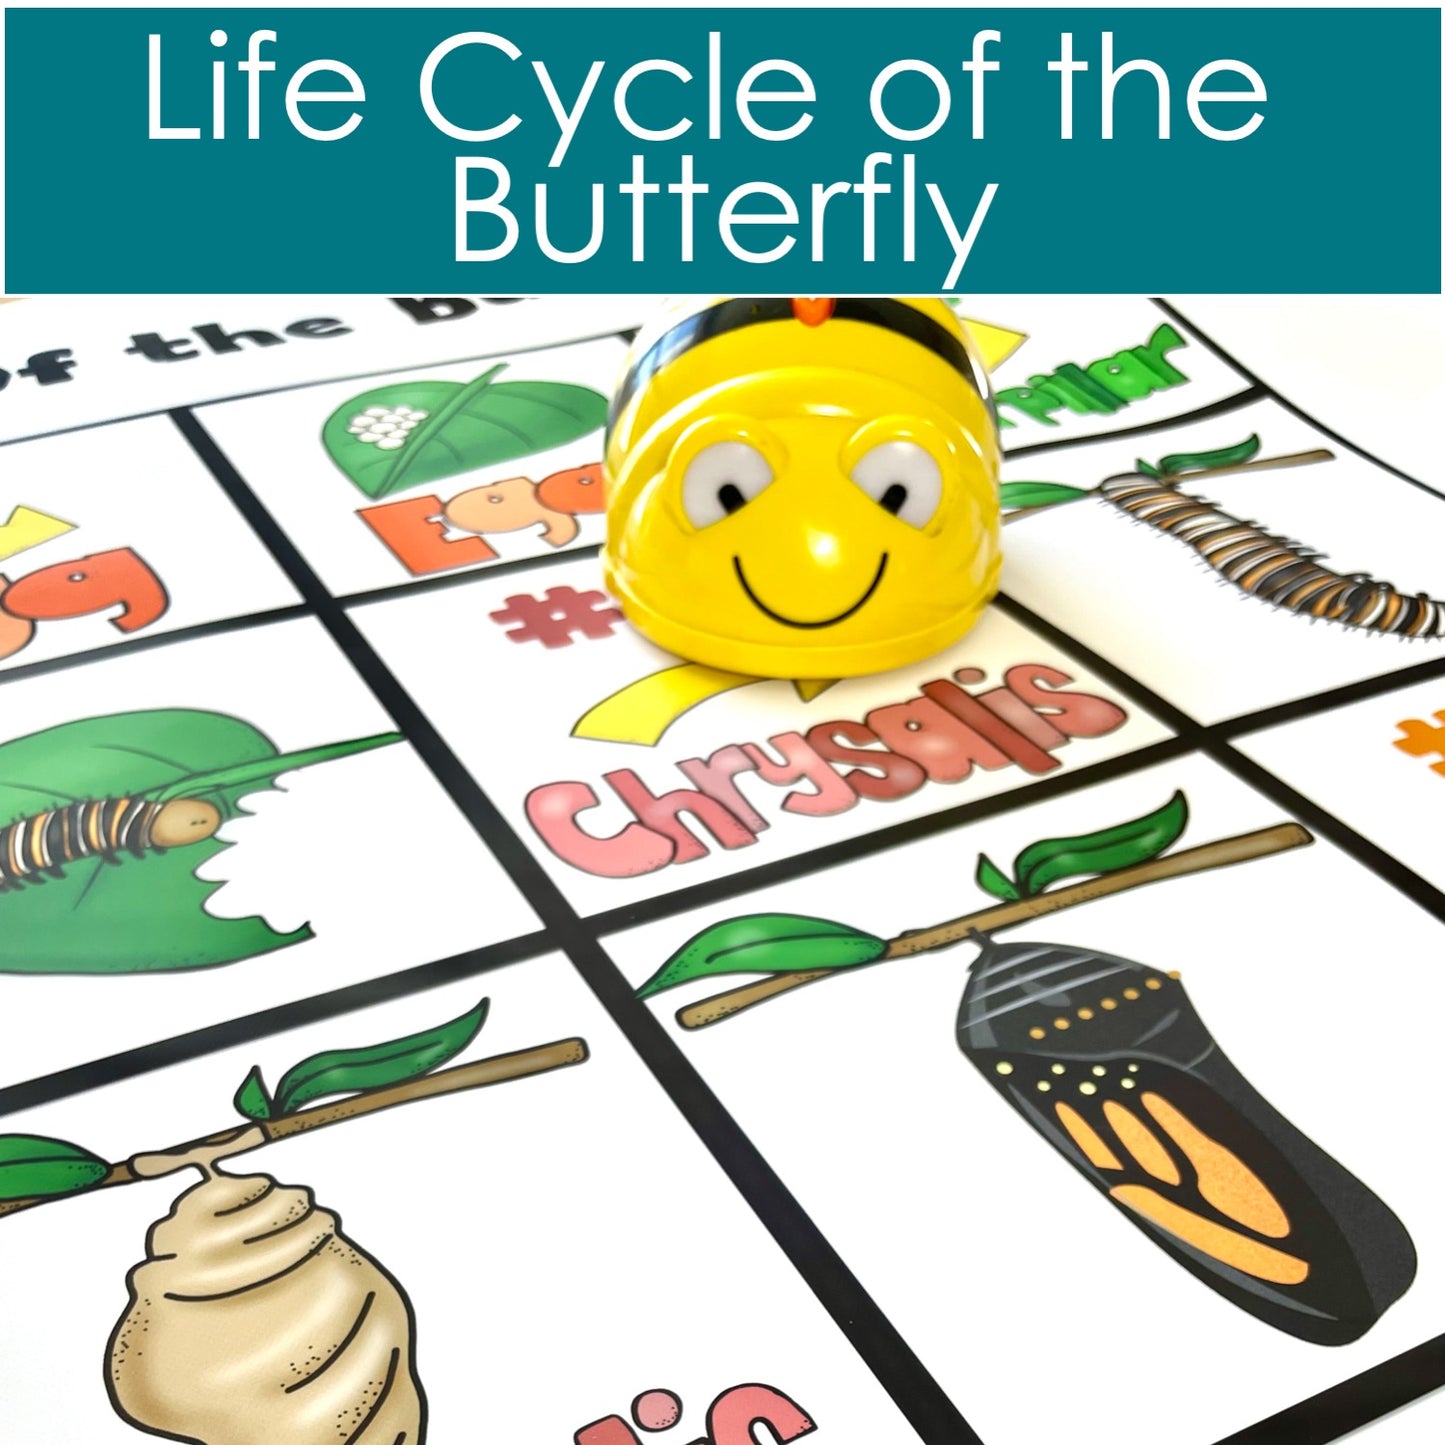 Life cycle of the butterfly BeeBot mat